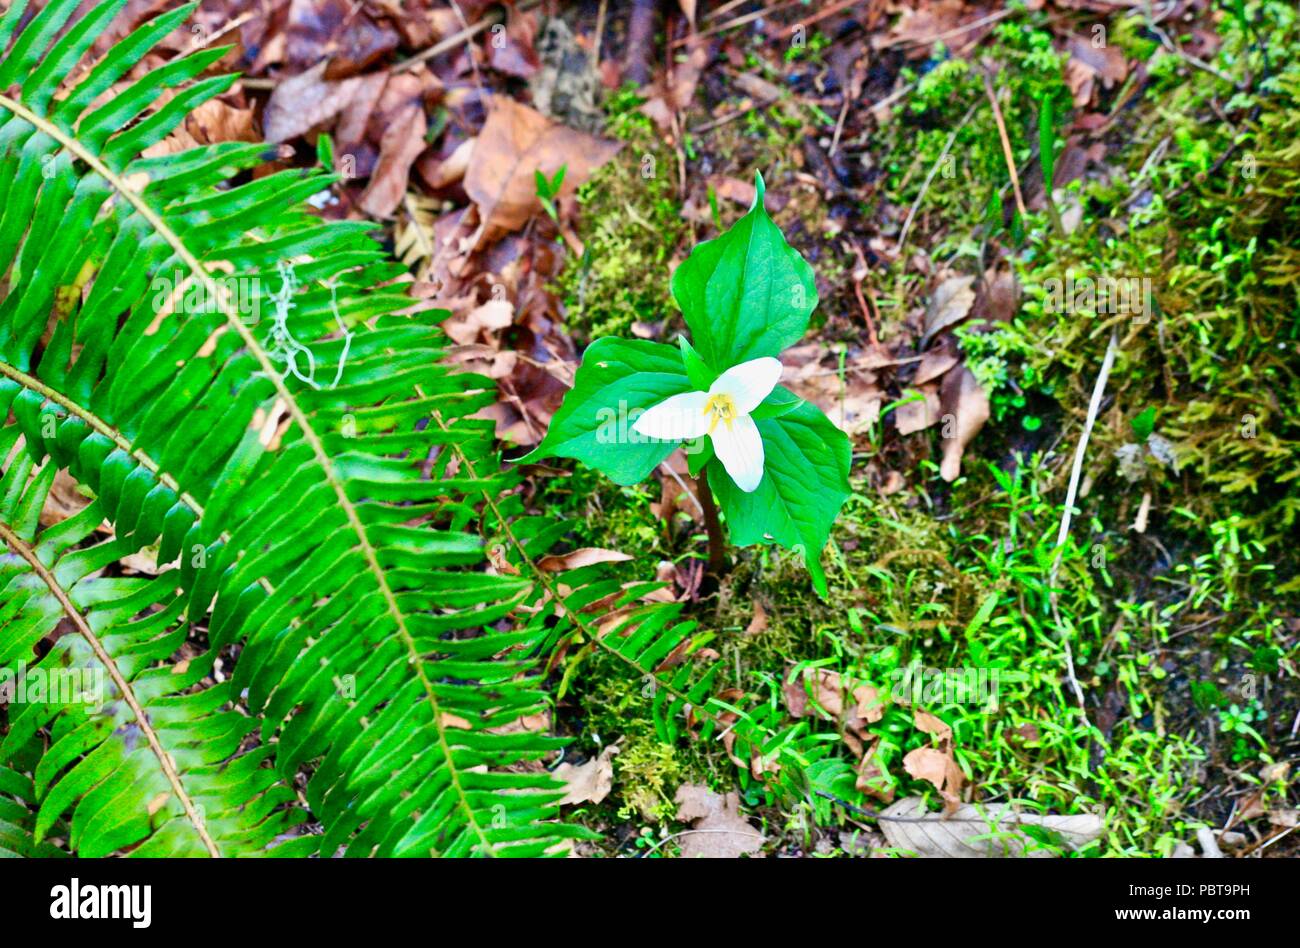 Trillium flower with ferns and dead leaves in forest setting Stock Photo